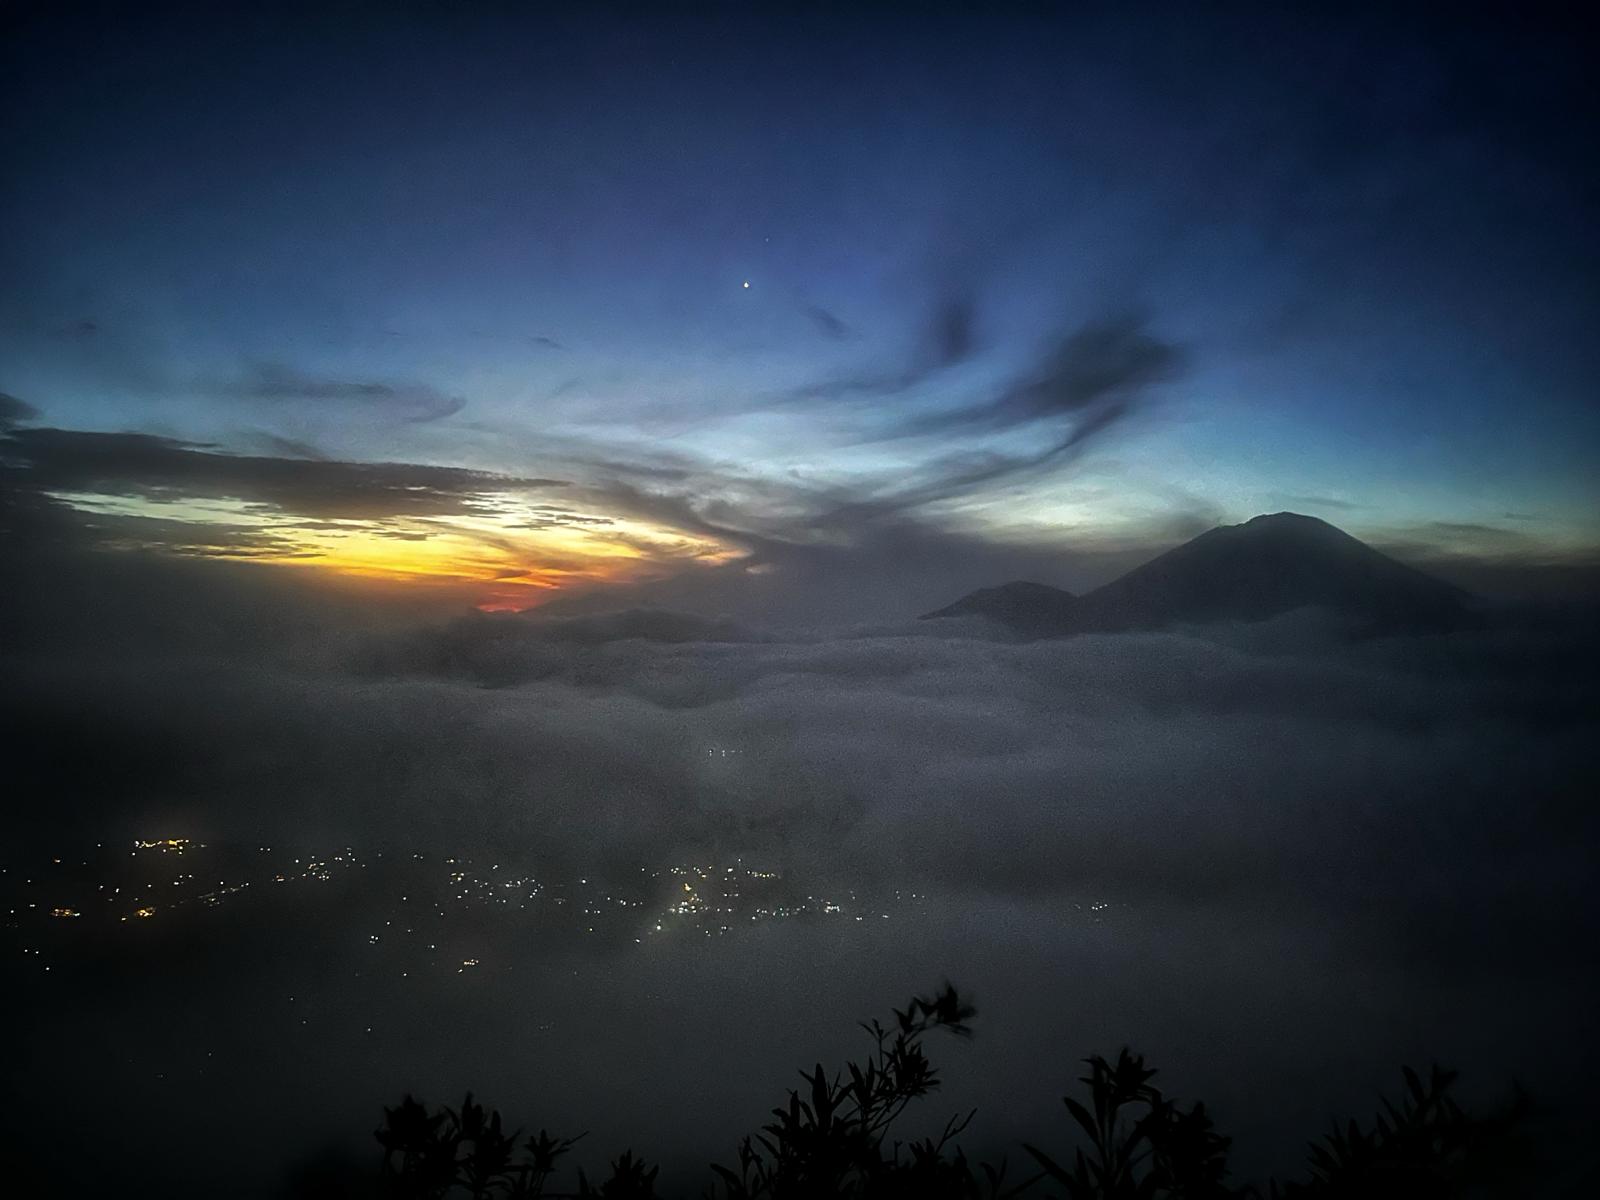 Everything you need to know before hiking Mount Batur in Bali – my day tour experience.